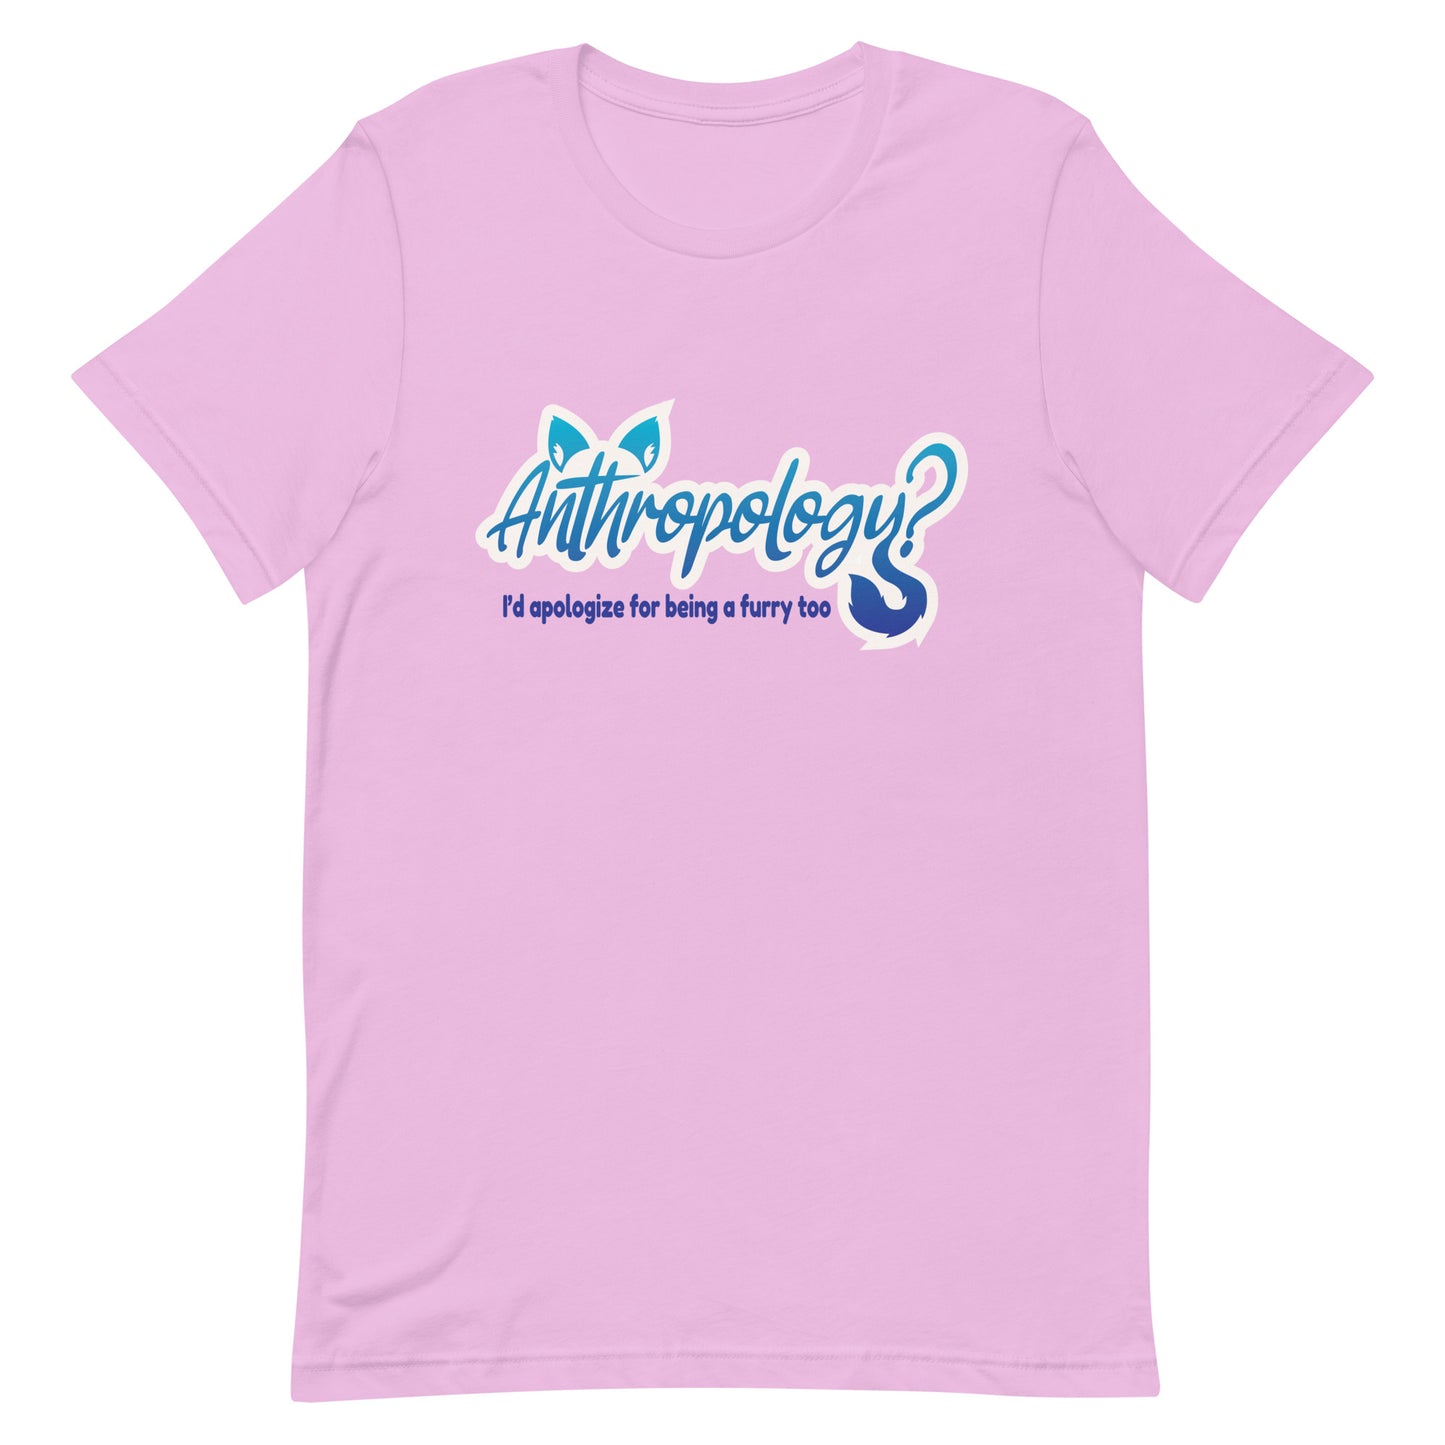 Anthropology? I'd Apologize Too (Furry) Unisex t-shirt